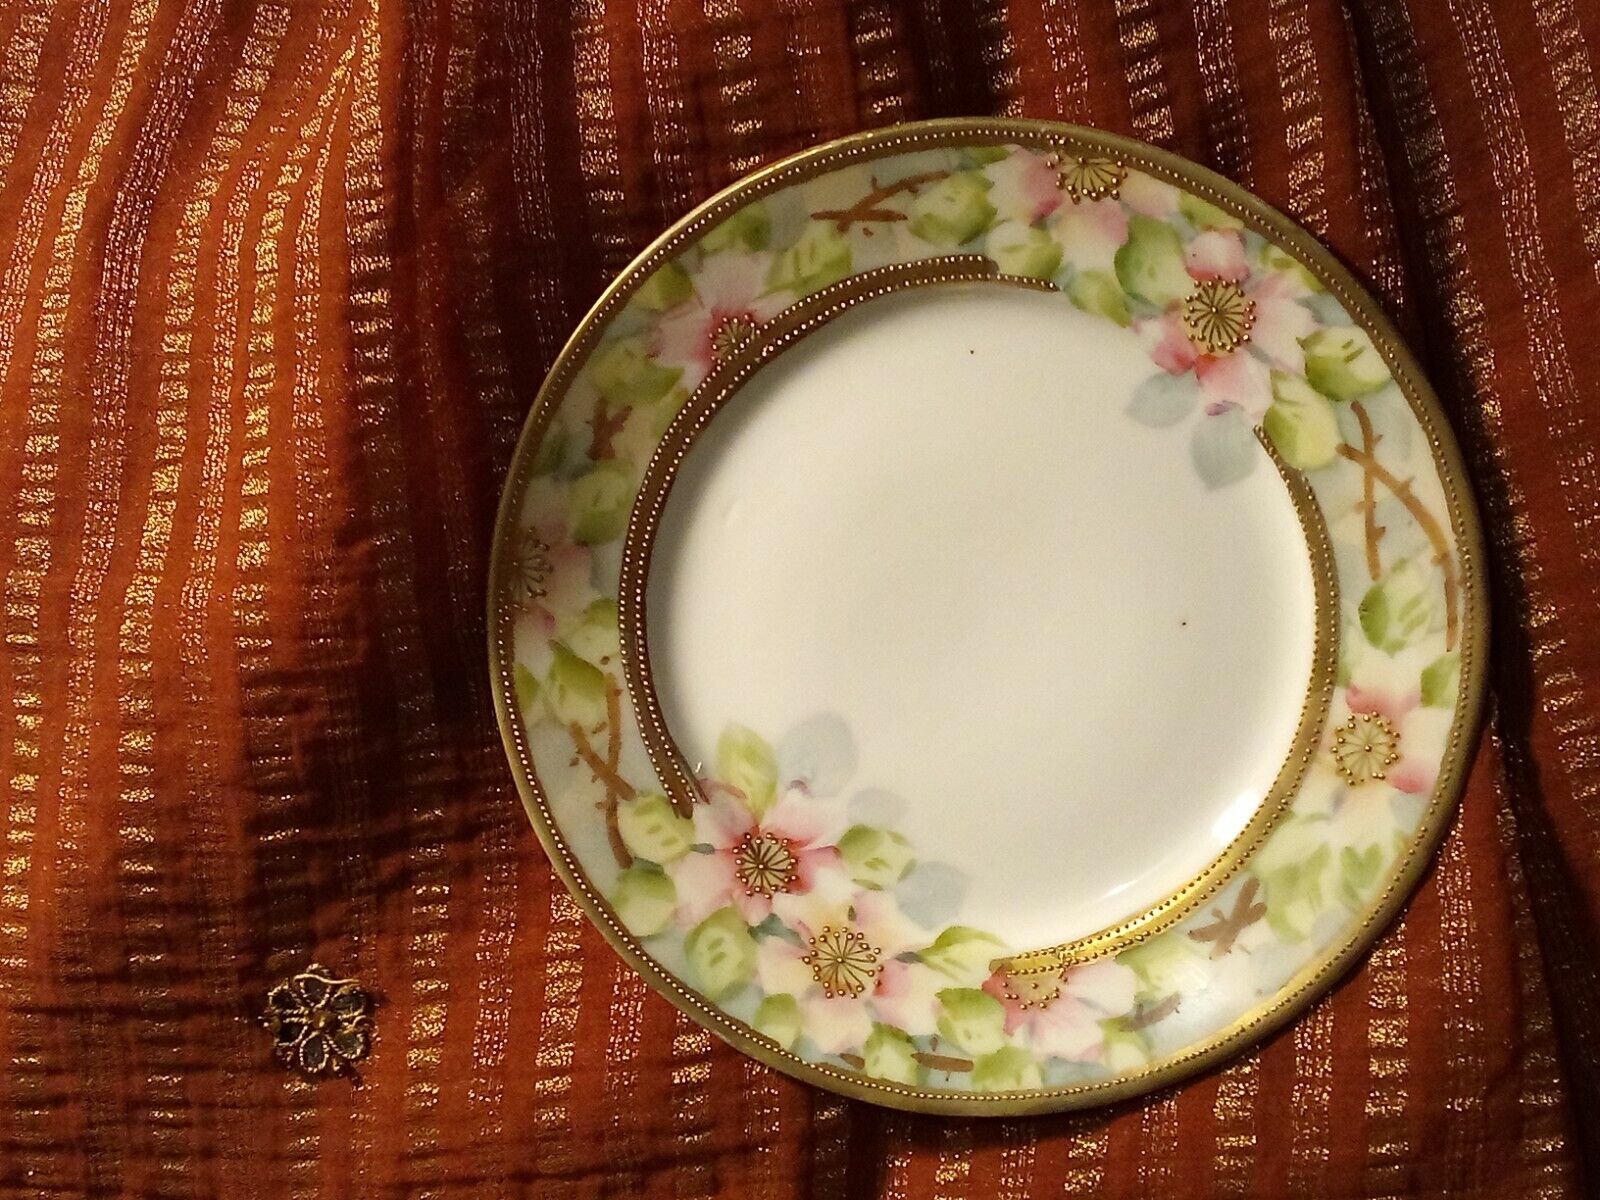 Porcelain antique Nippon moriage cake plate dish pink roses cherry blossoms gold